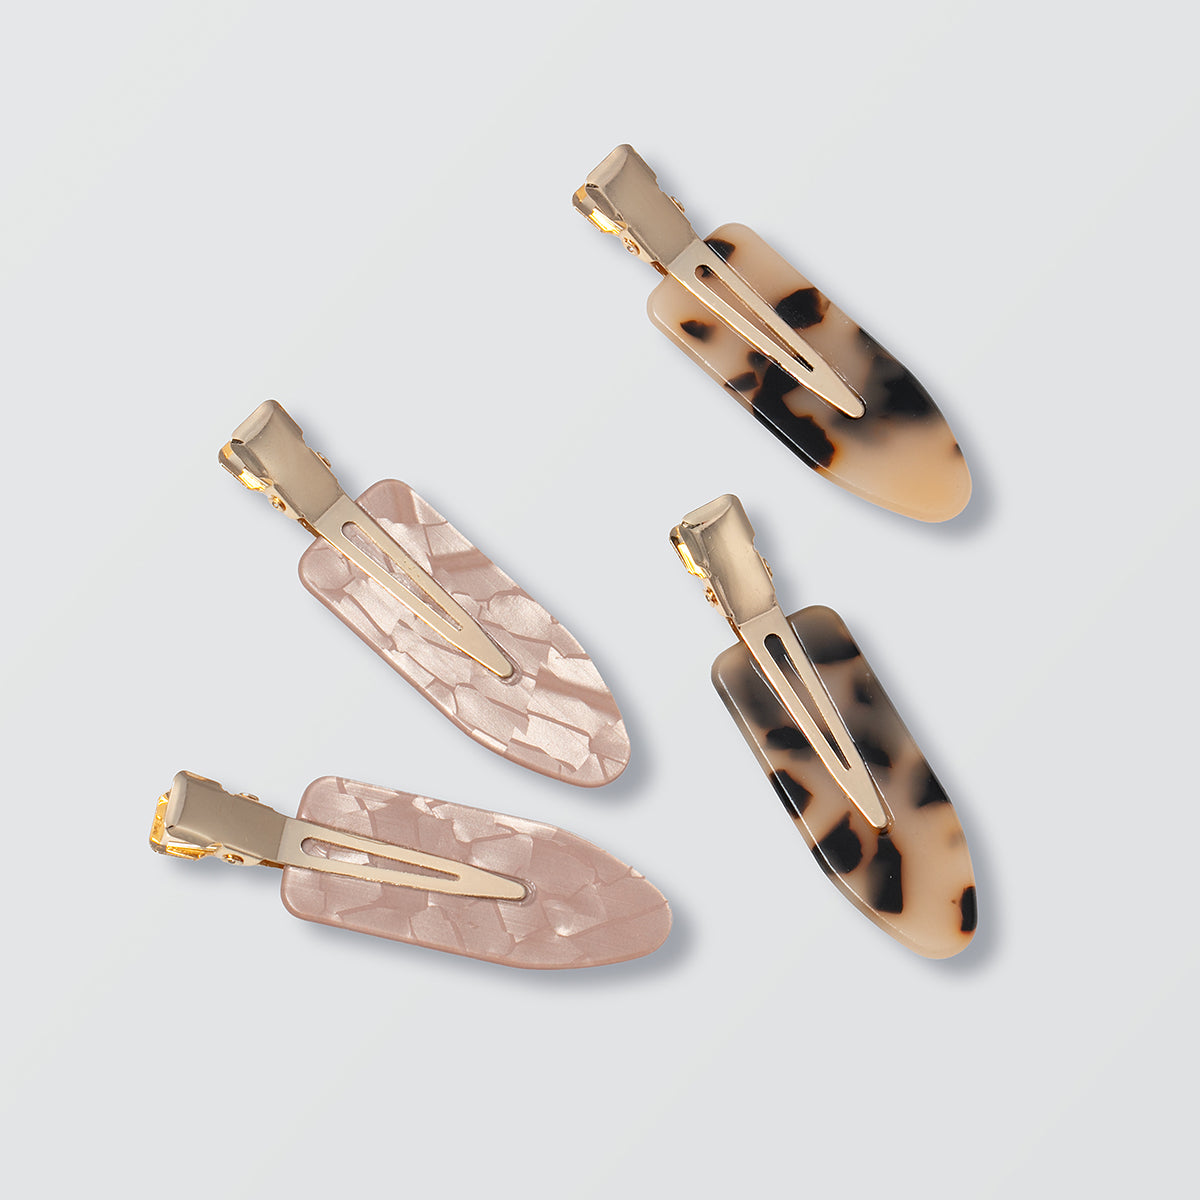 No Crease Hair Clips | Product Image | Uncommon Beauty